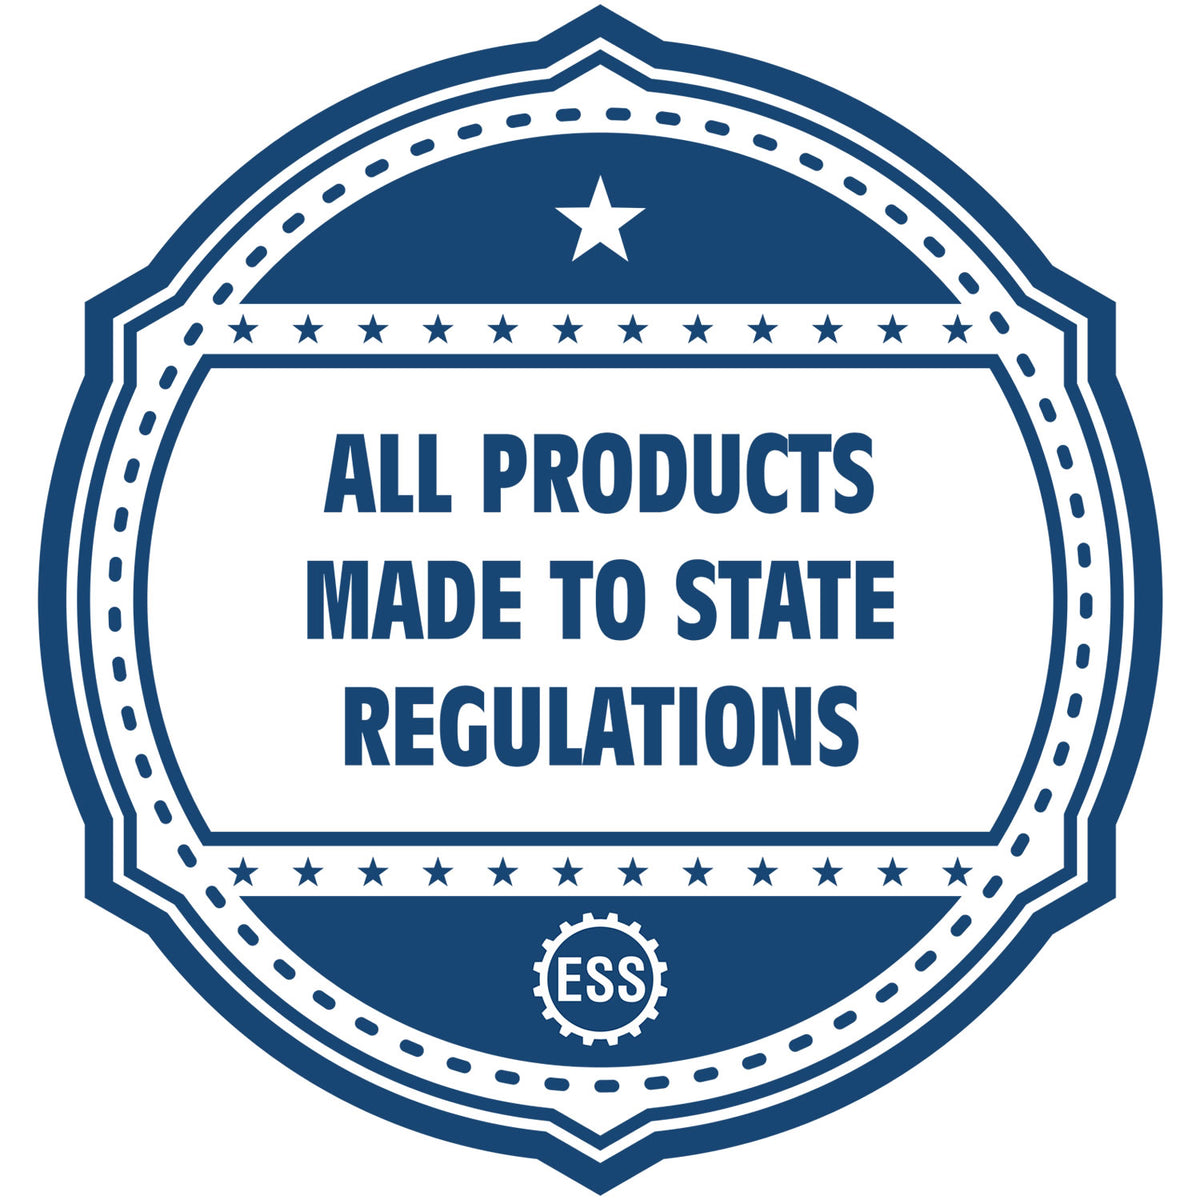 An icon or badge element for the Slim Pre-Inked Michigan Professional Engineer Seal Stamp showing that this product is made in compliance with state regulations.